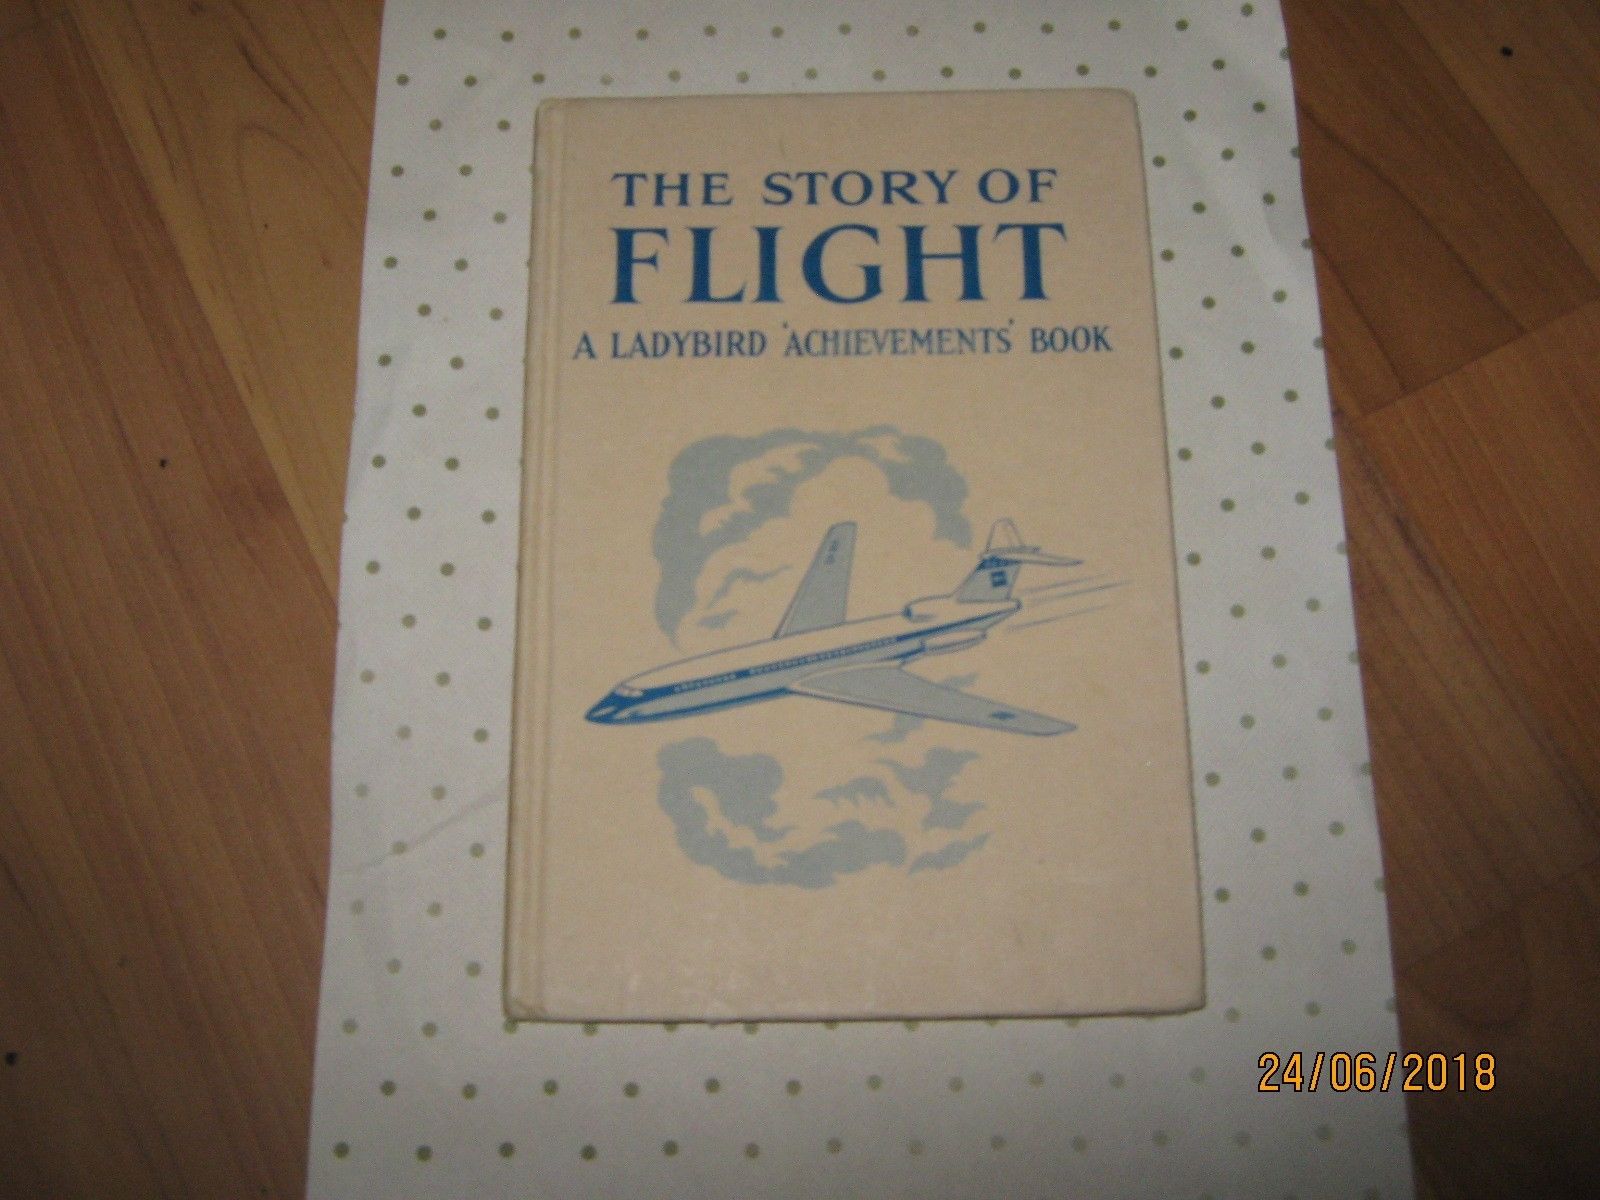 Ladybird book the story of Flight -- Antique Price Guide Details Page